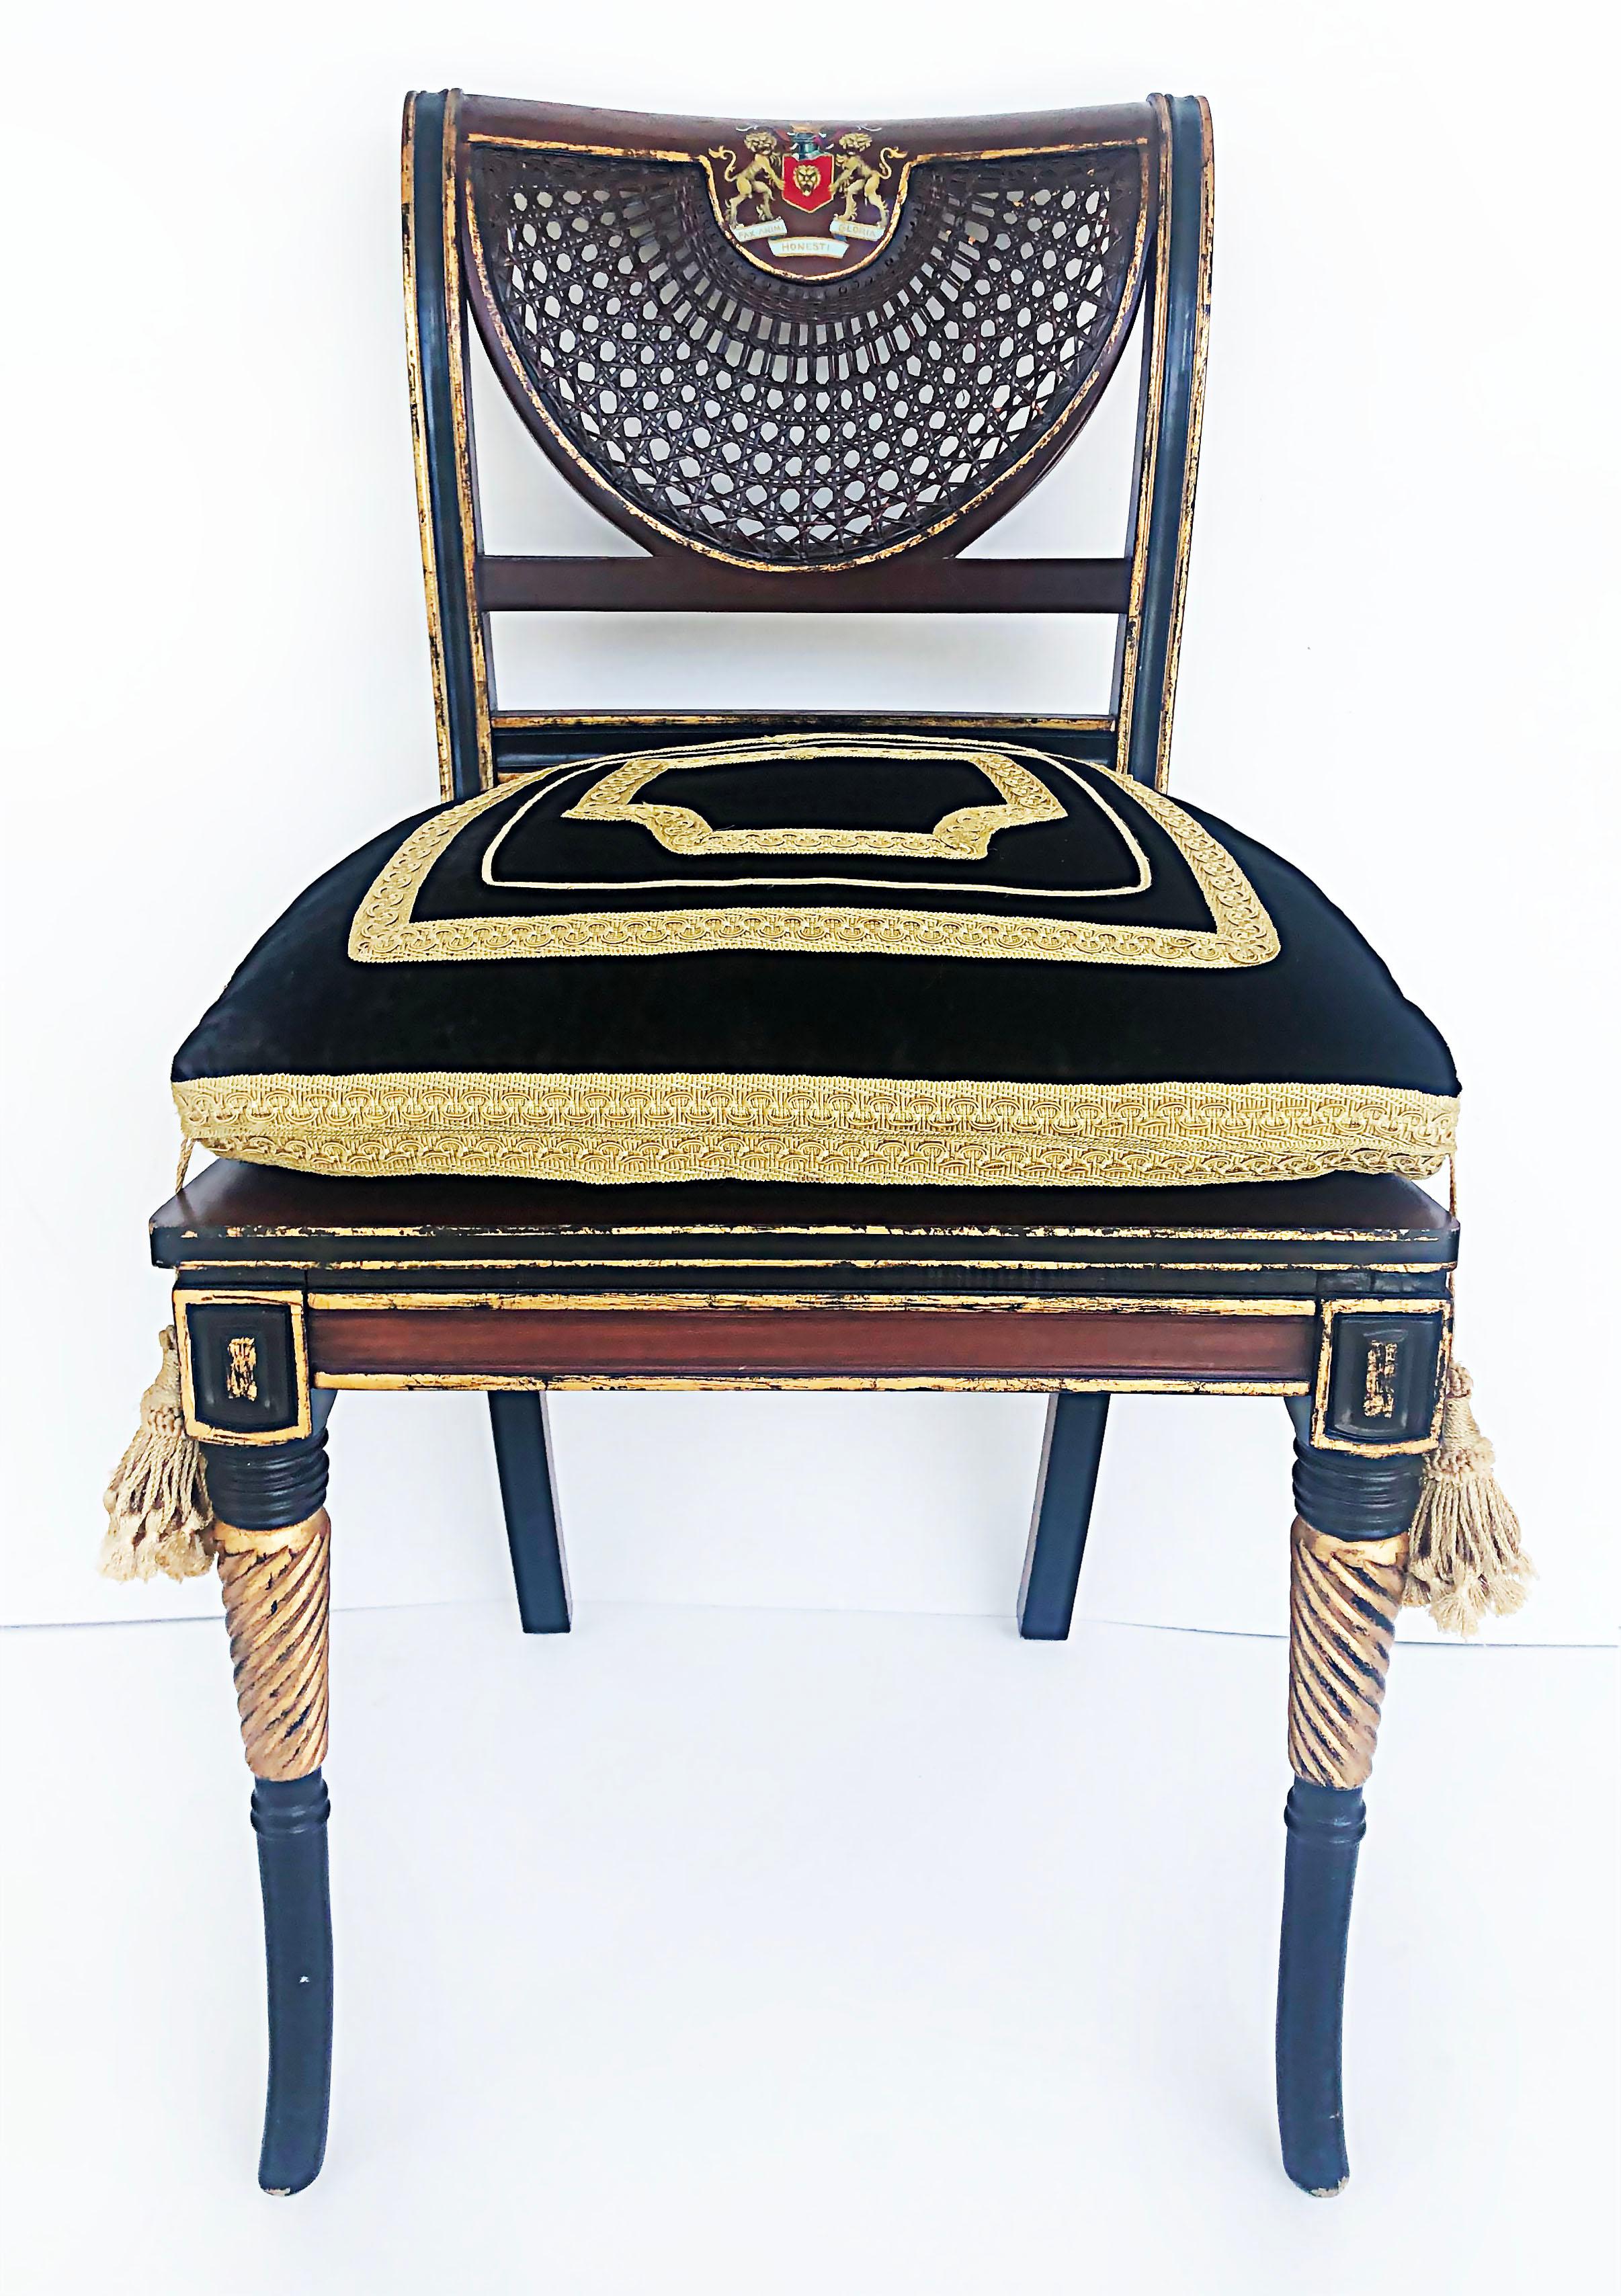 20th Century Clive Christian Regency Style Hand-Painted Caned Chairs with Coat of Arms, Pair